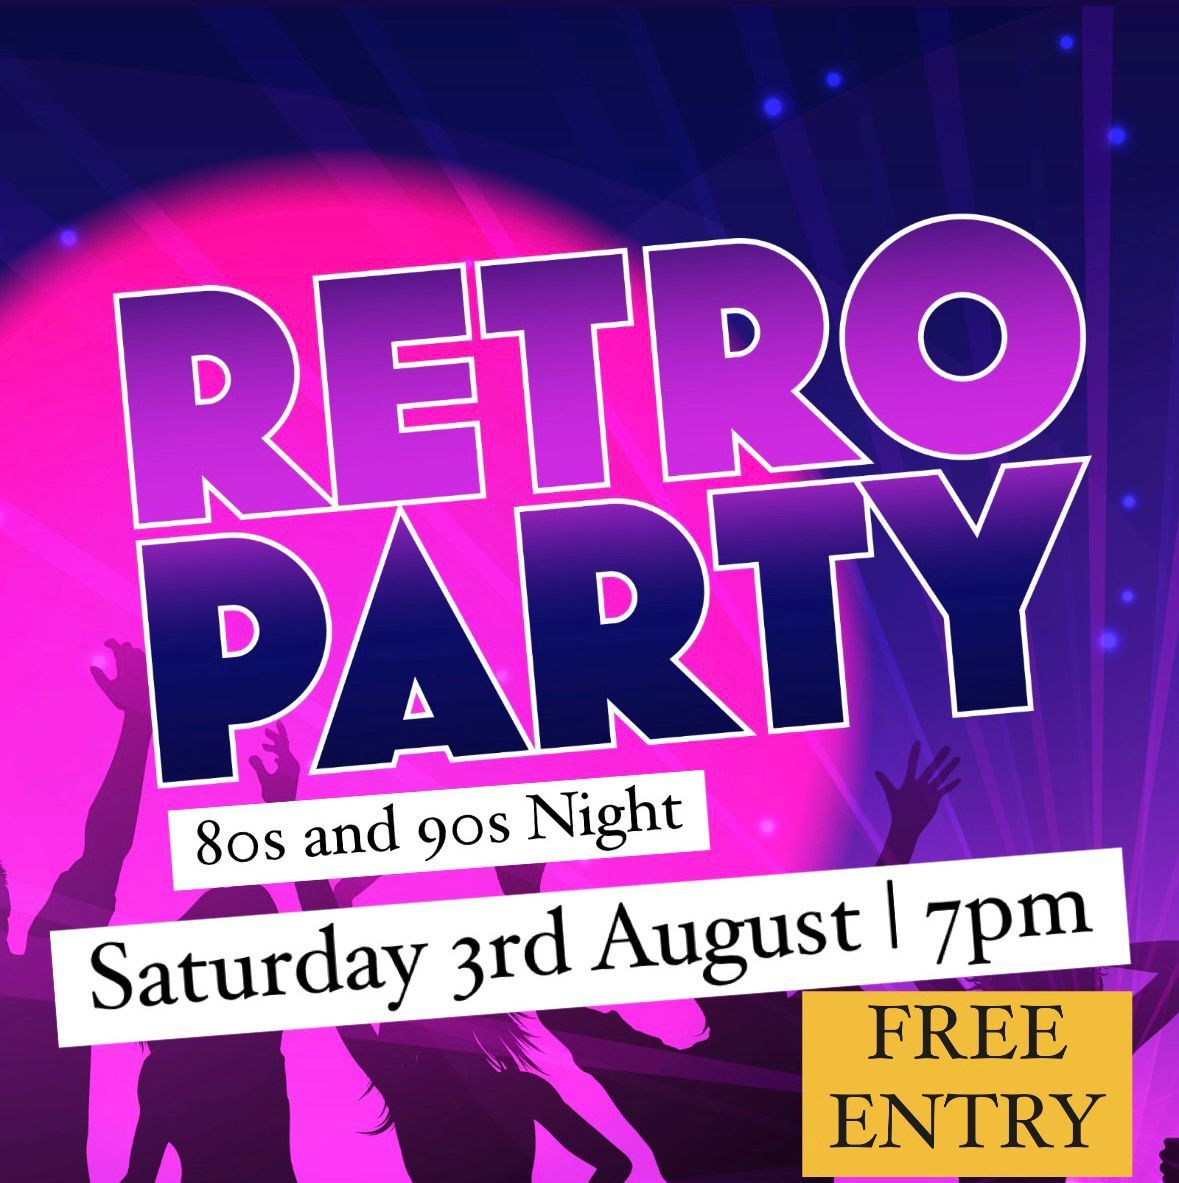 Retro Party is Back!